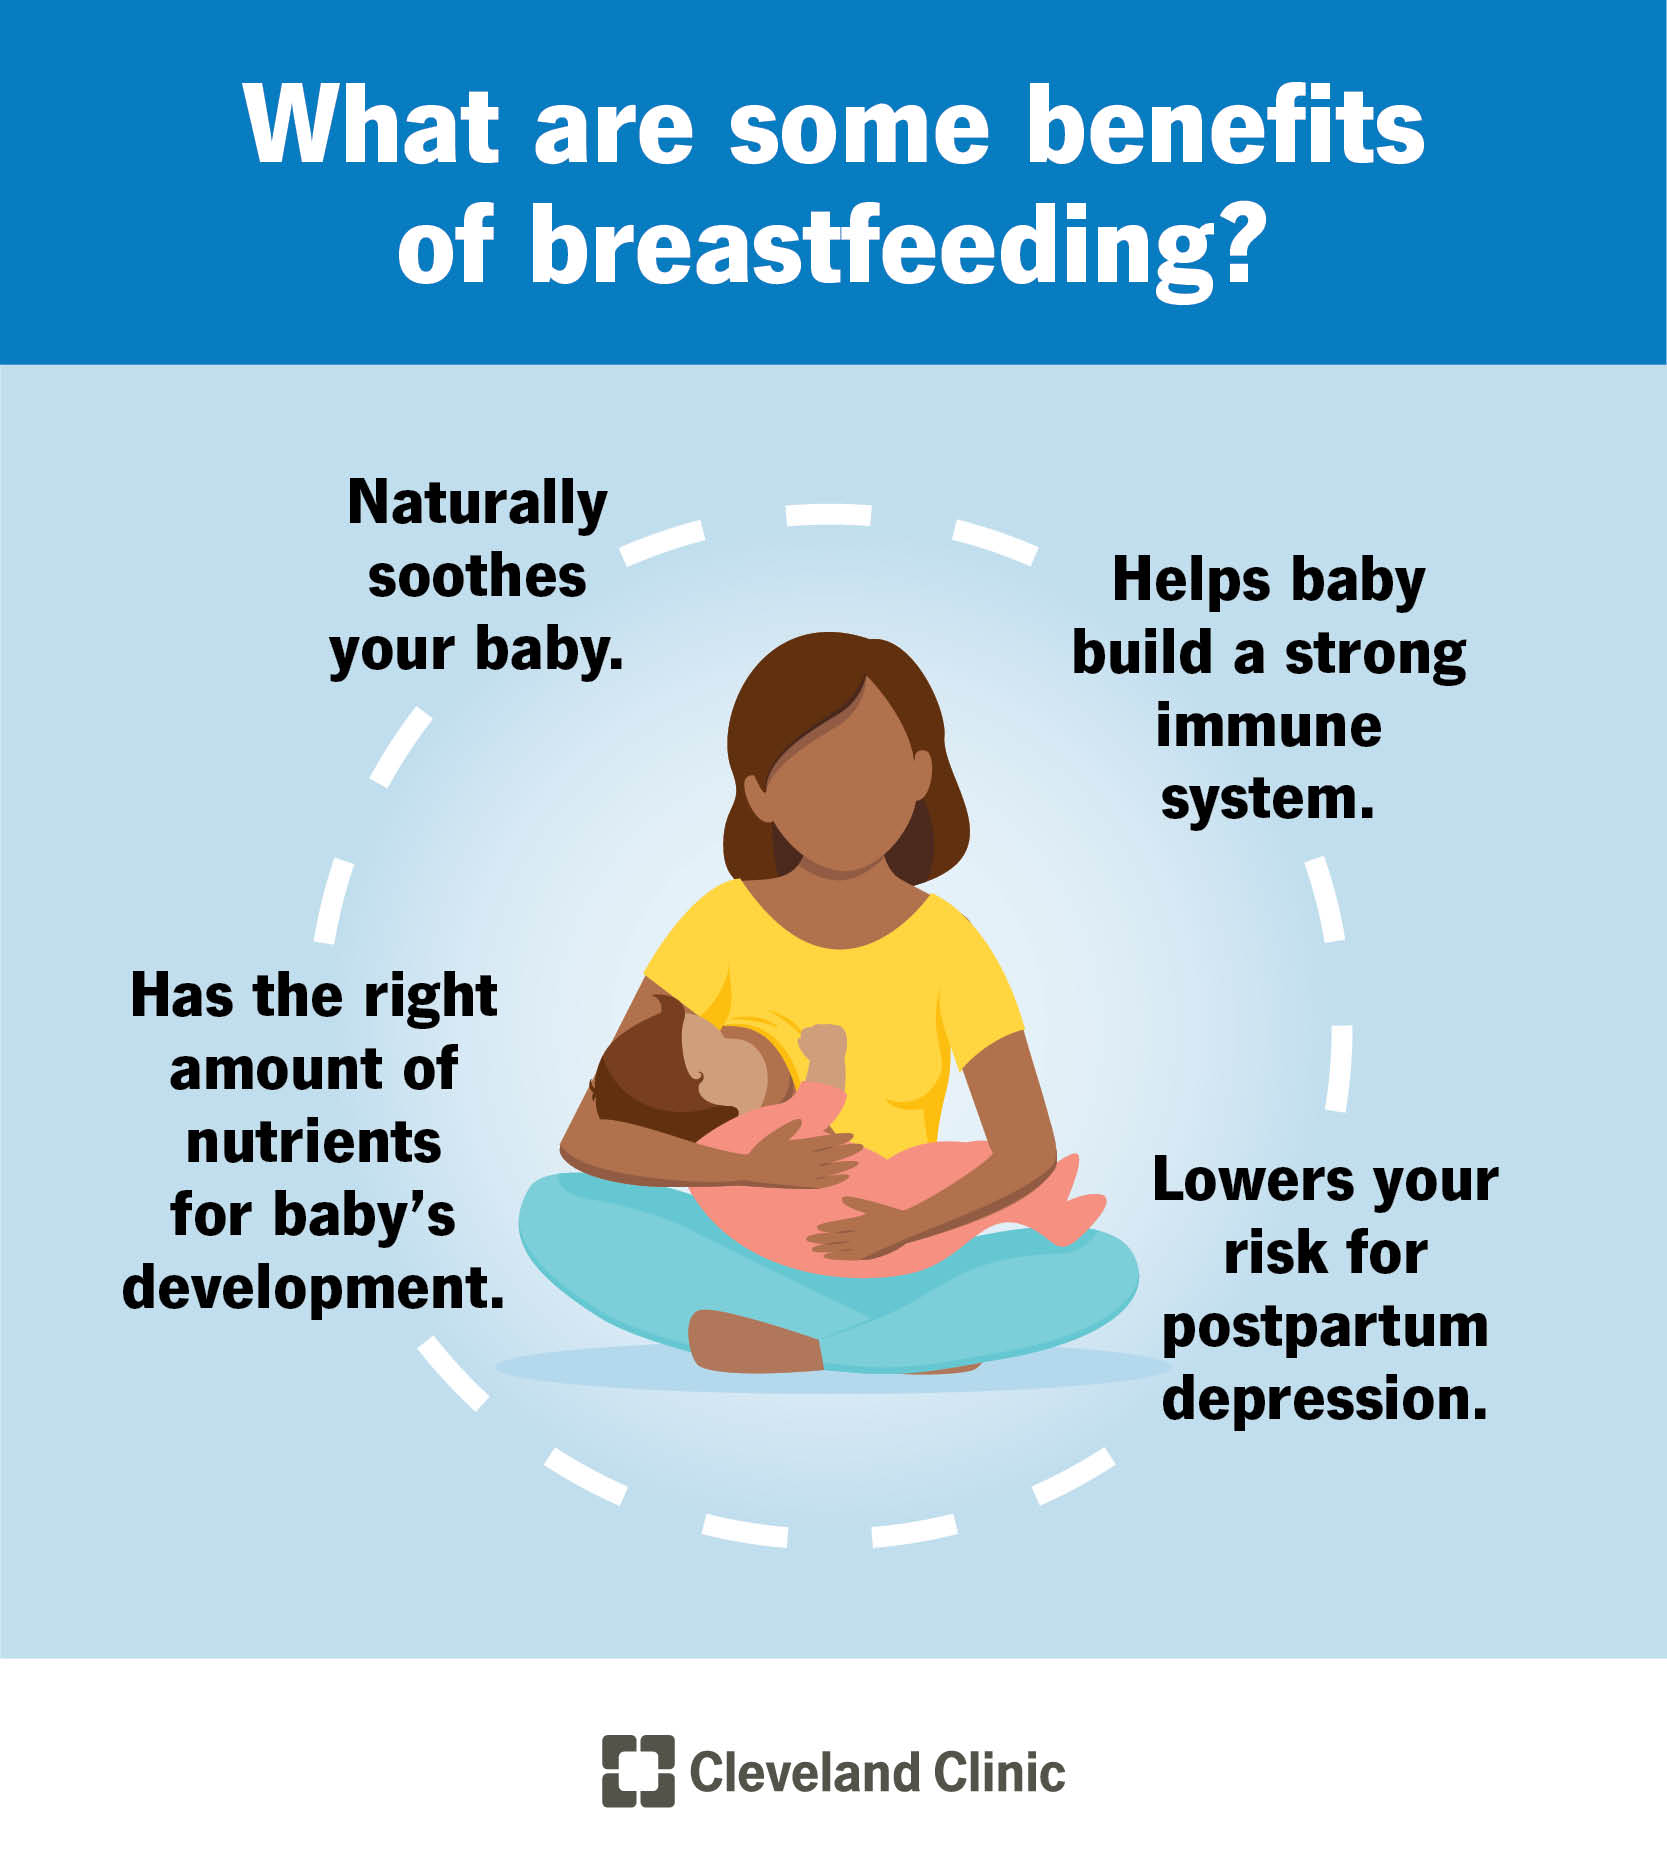 A woman breastfeeding her baby with several benefits of breastfeeding for mom and baby listed around her.